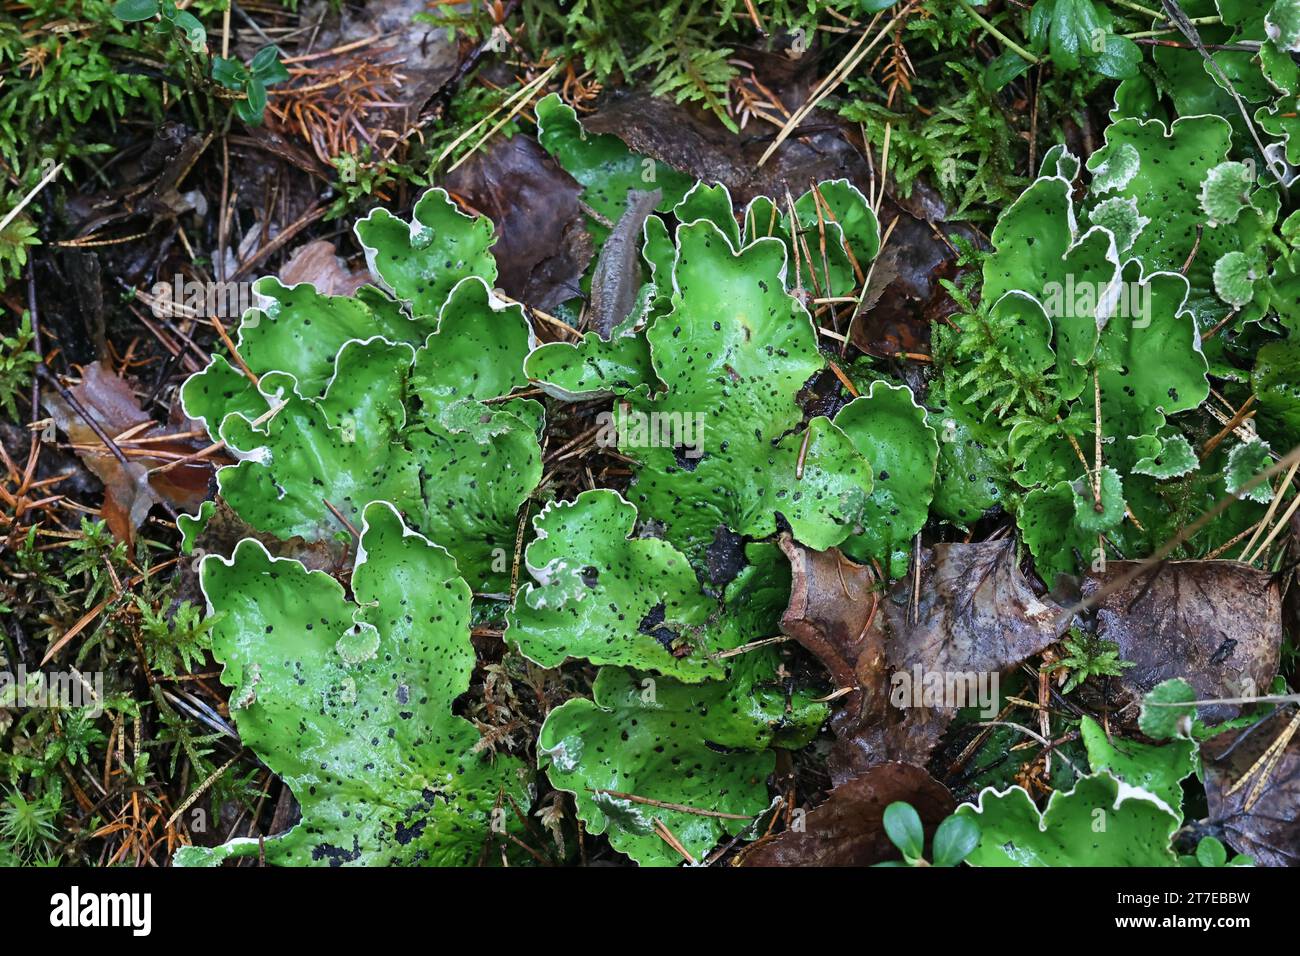 Peltigera aphthosa, known as dog lichen, leafy lichen, felt lichen, and common freckle pelt, lichens from Finland Stock Photo